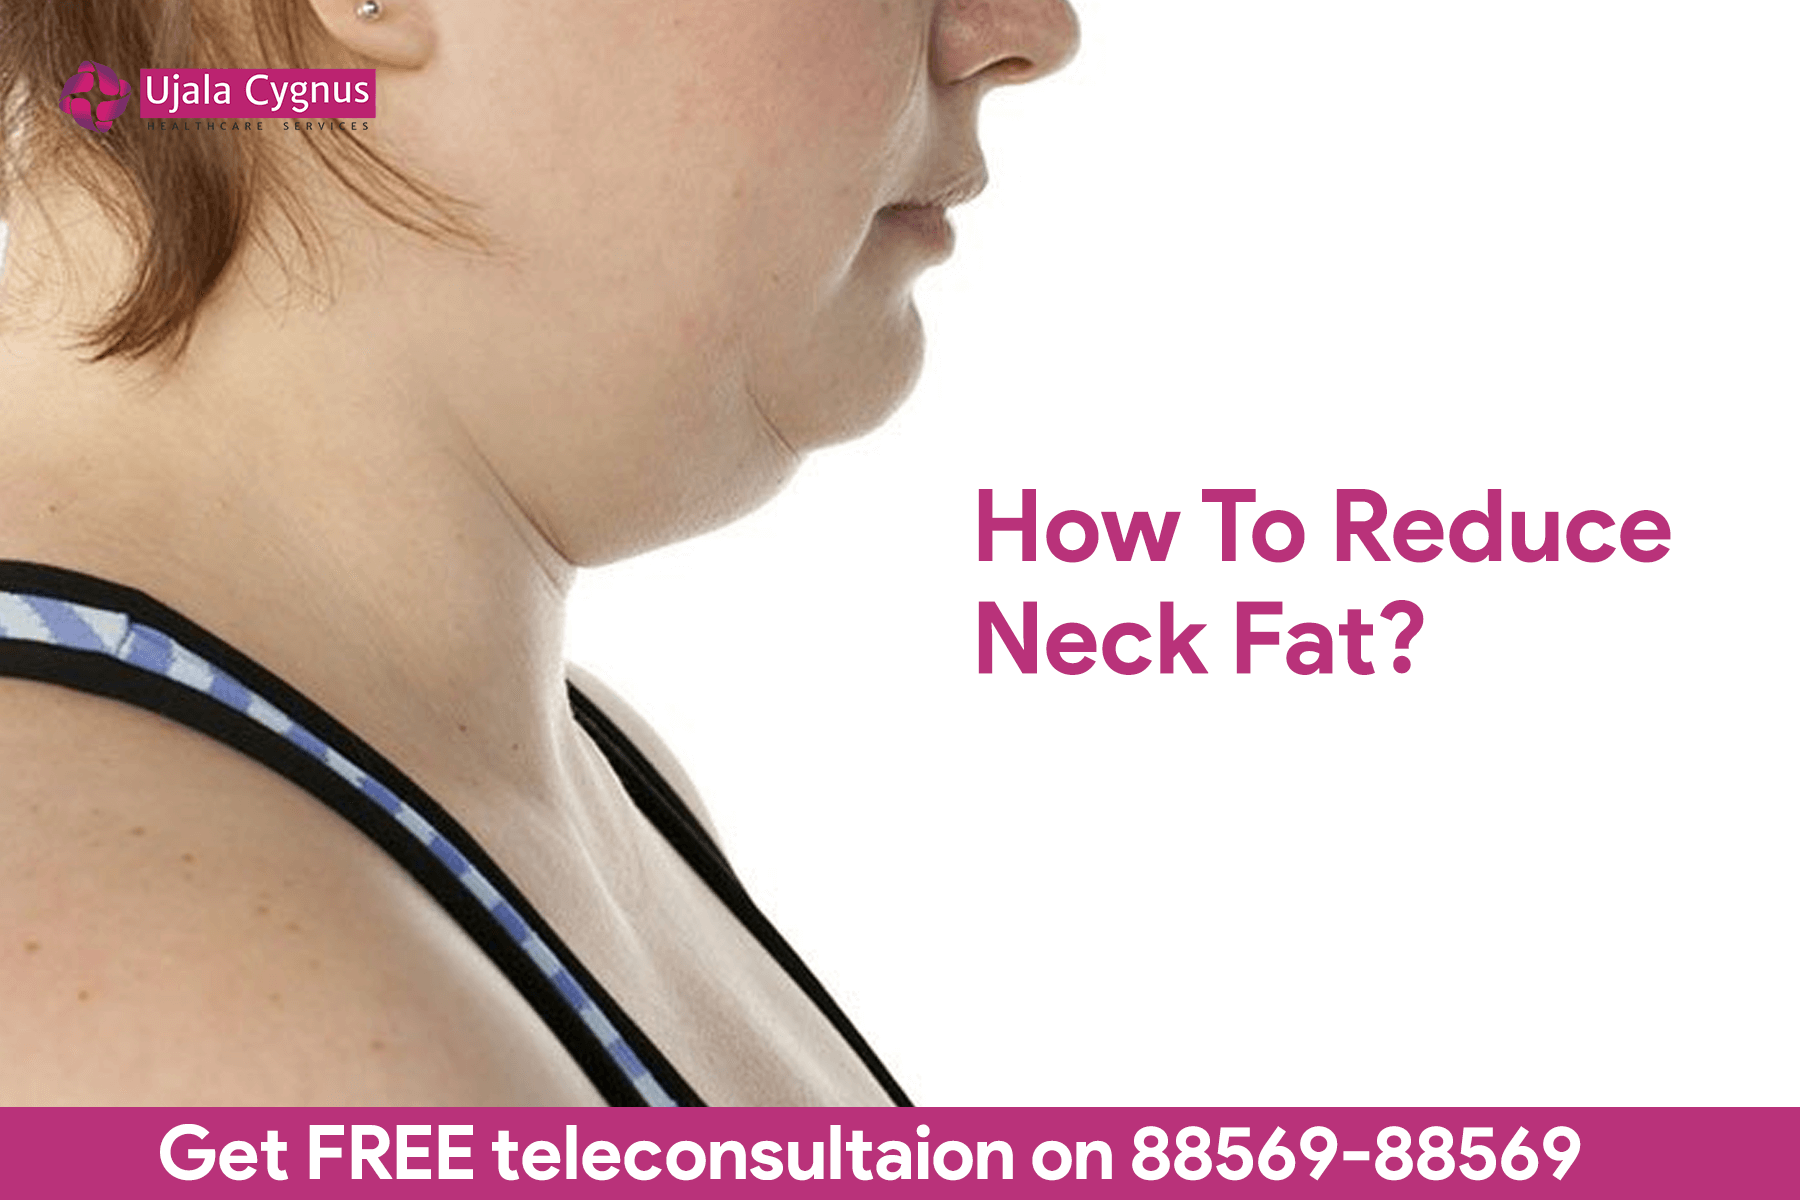 How To Reduce Neck Fat?